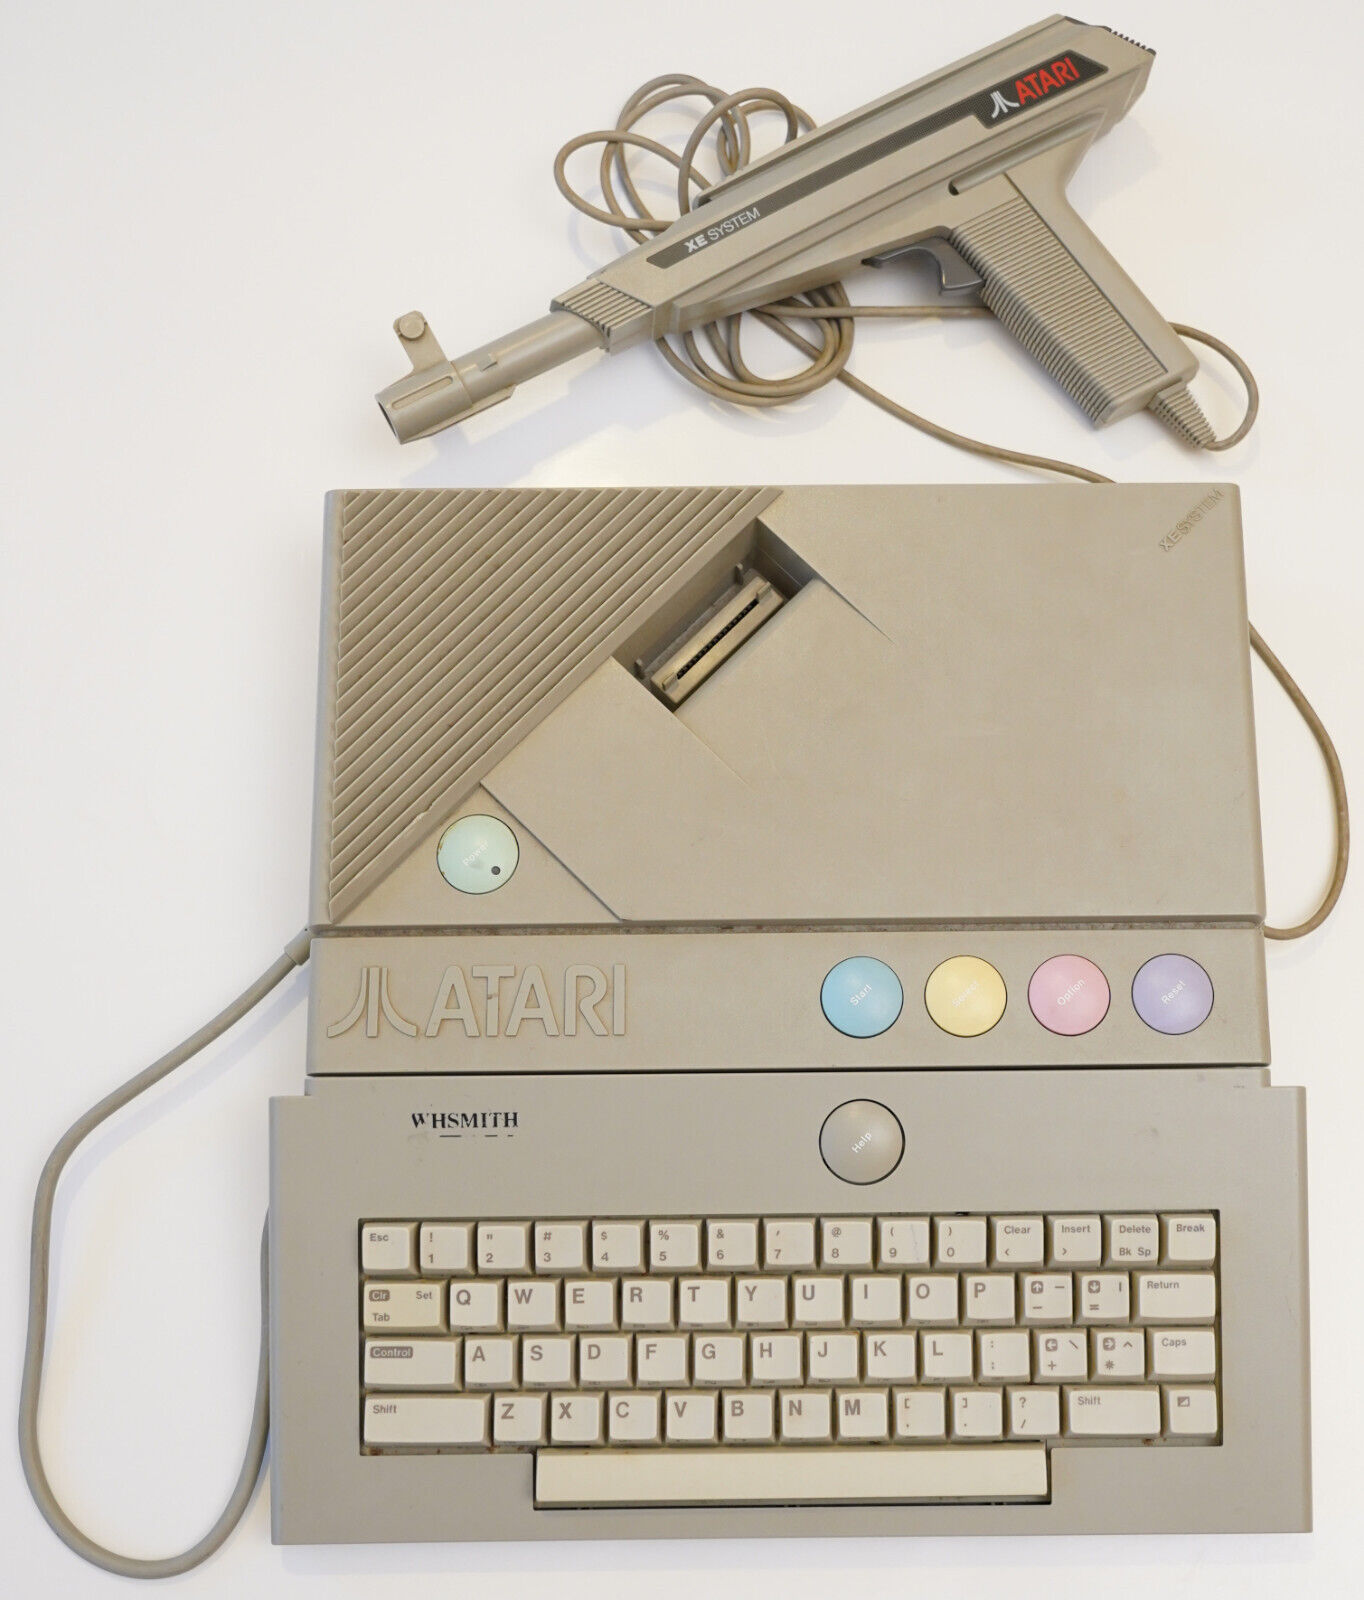 ATARI XE SYSTEM XEGS - With Keyboard and Pistol controller